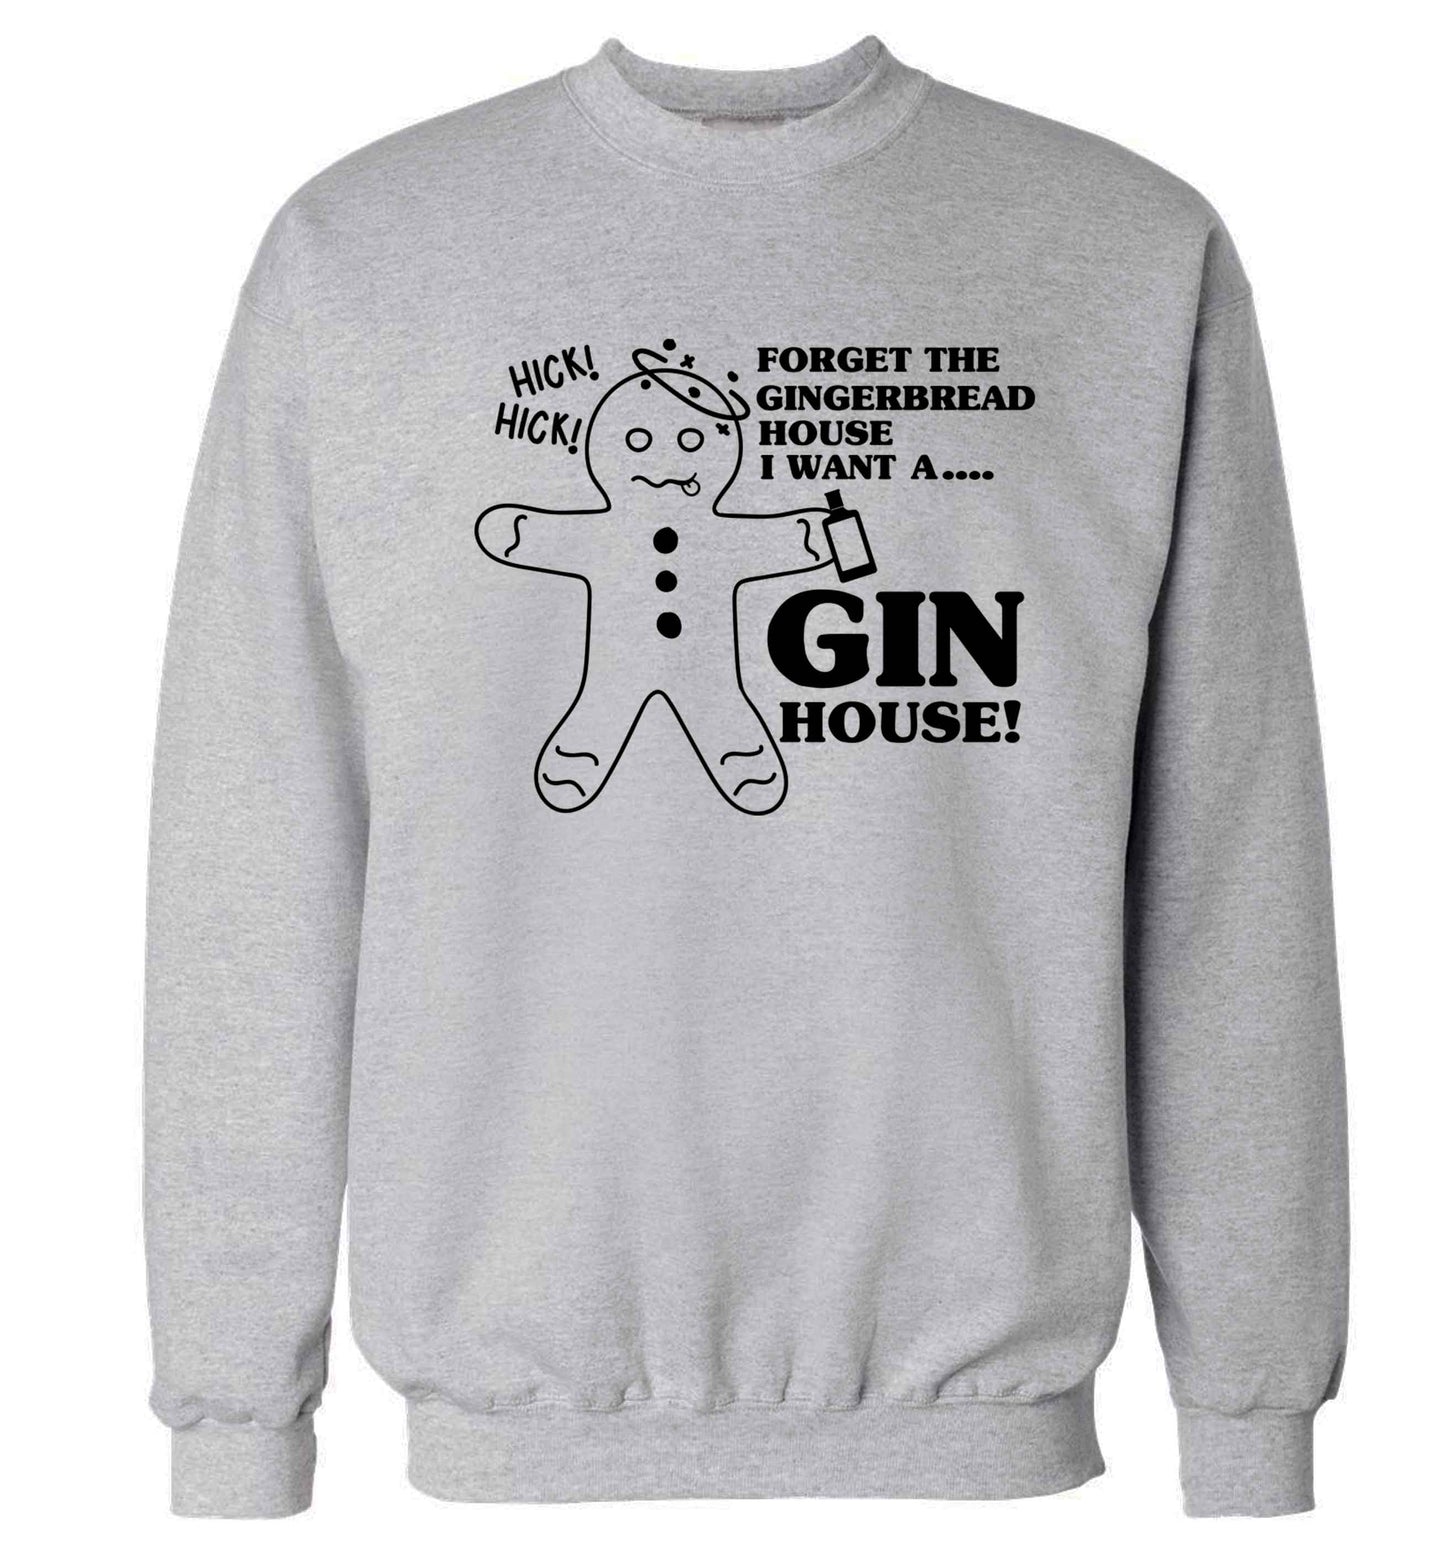 Forget the gingerbread house I want a gin house Adult's unisex grey Sweater 2XL